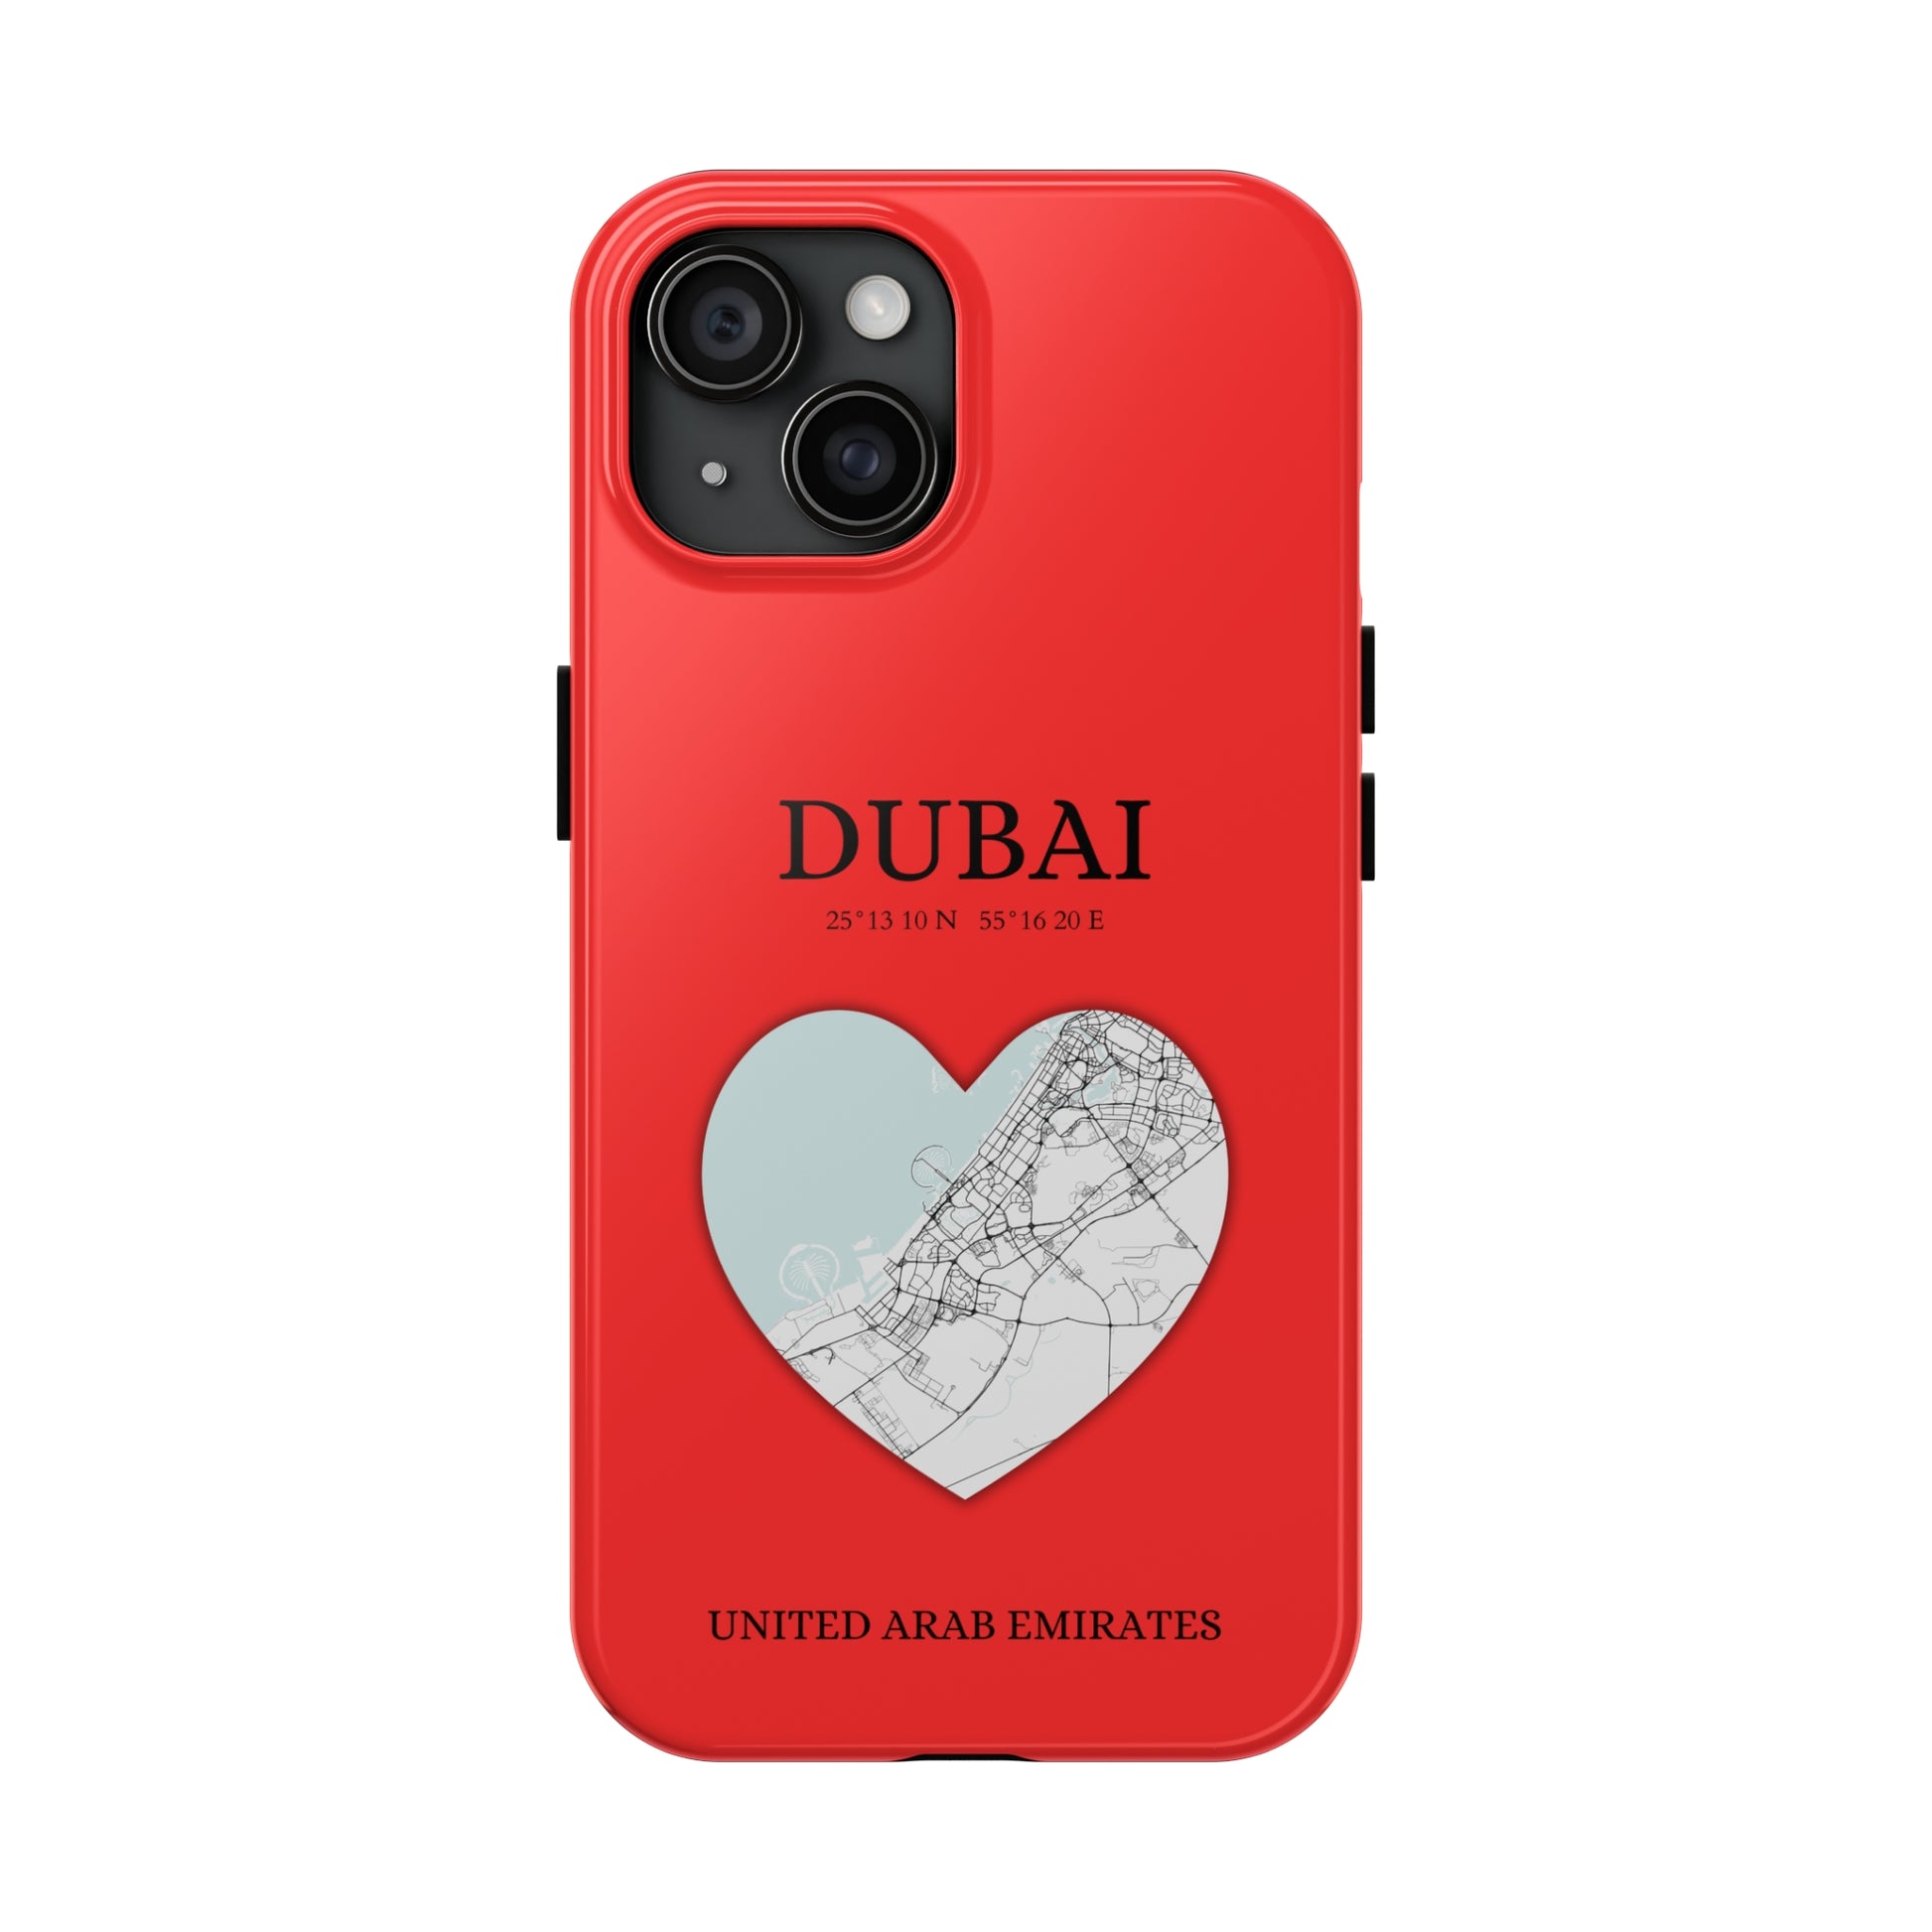 Dubai Heartbeat - Red (iPhone Case 11-15)Capture the essence of Dubai with RimaGallery's Heartbeat Red iPhone case, blending durable protection and unique design. Perfect for iPhone 11-15 models. Free shippRimaGallery